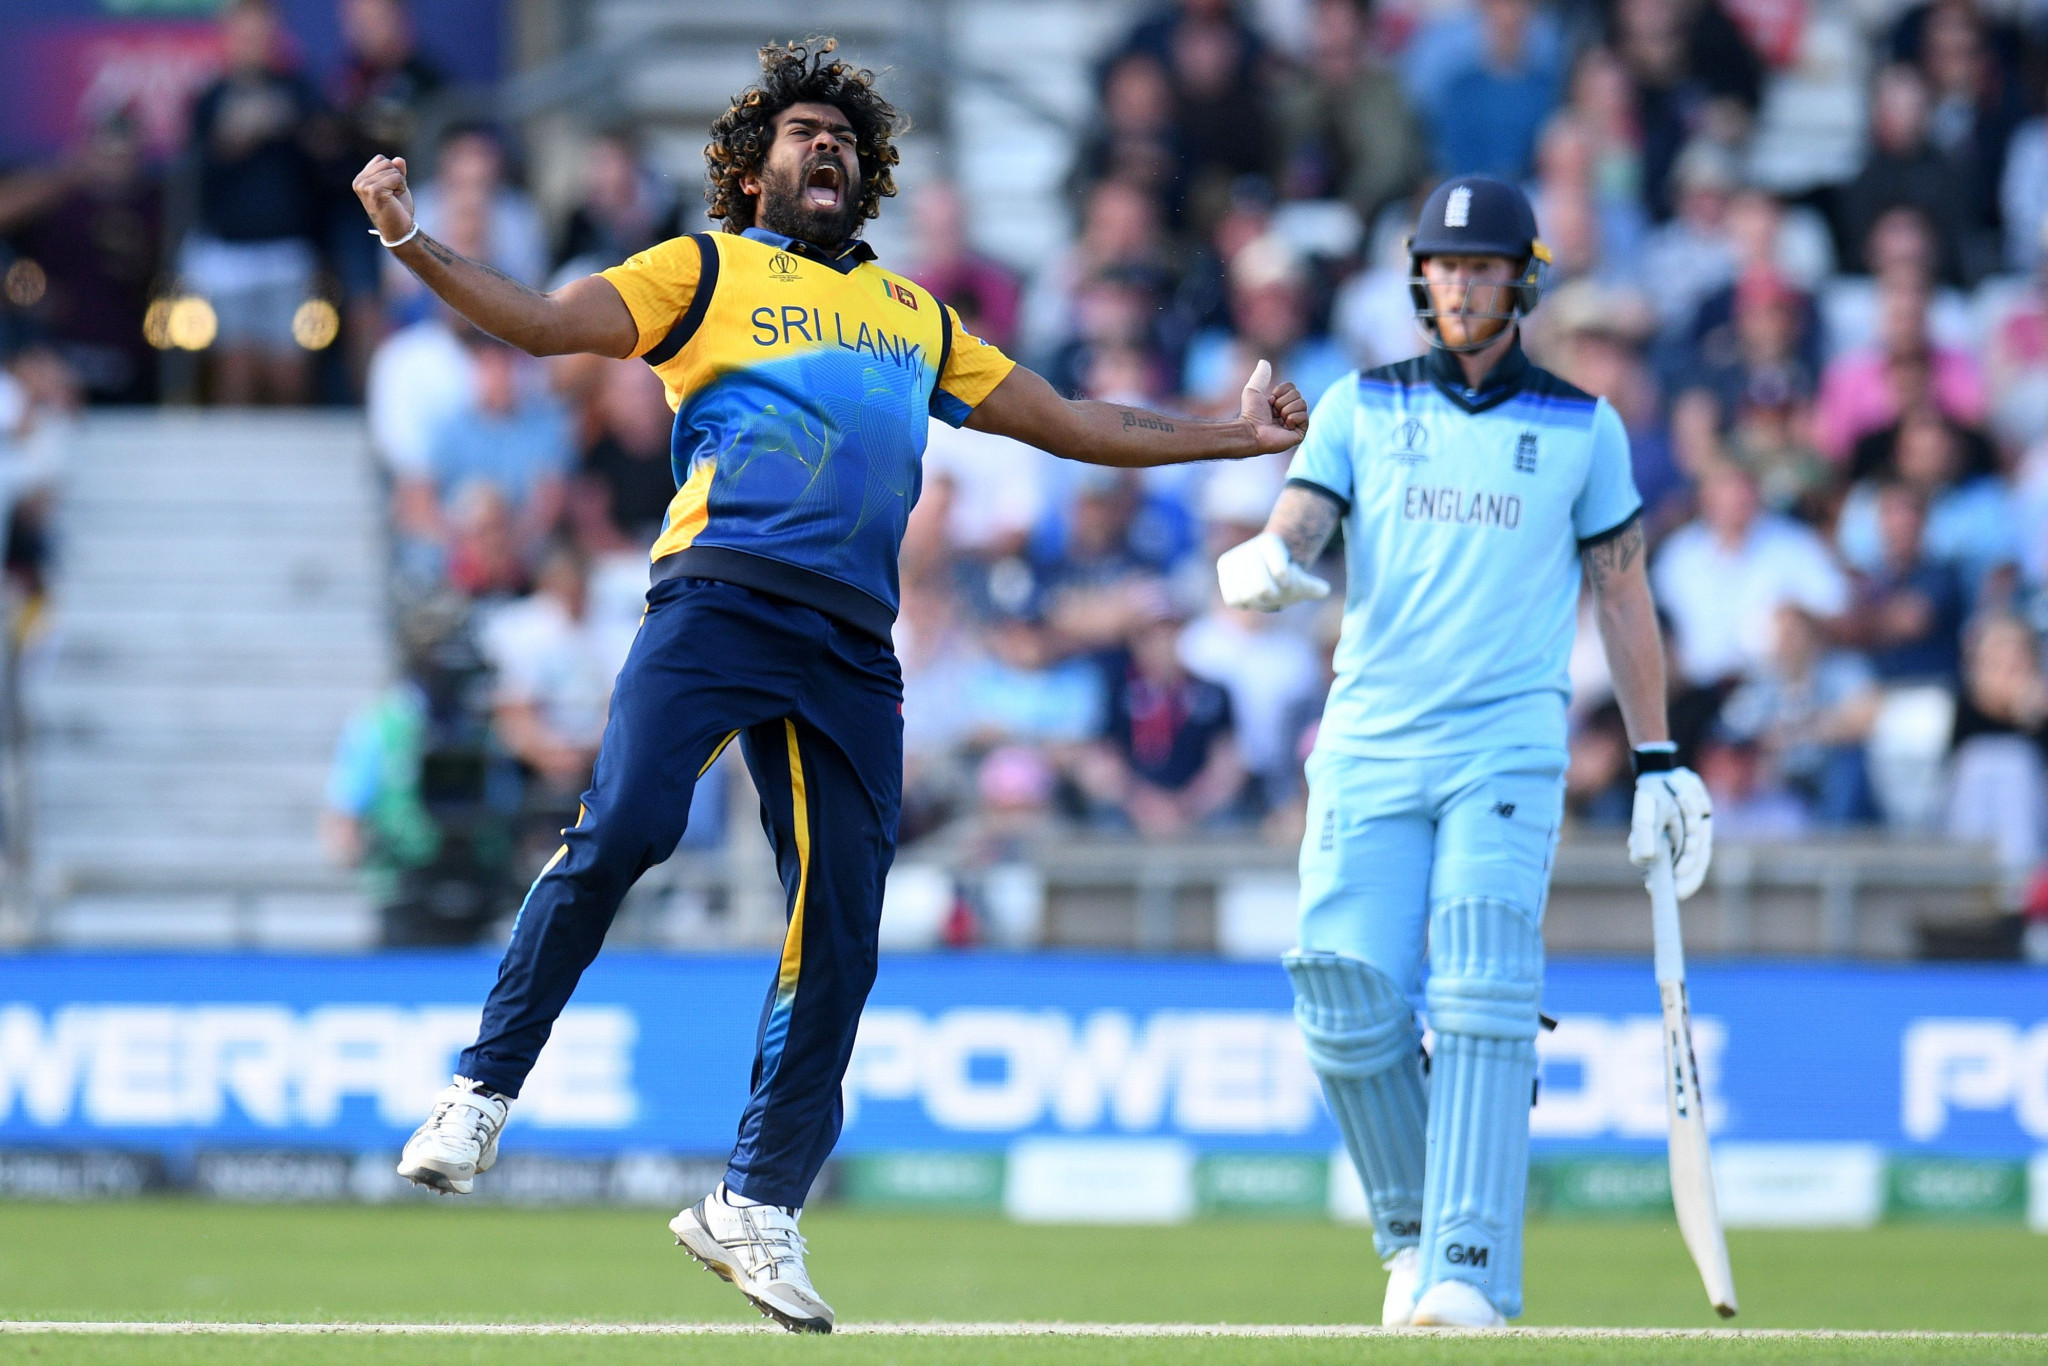 Sri Lanka caused the biggest upset of the Cricket World Cup so far as they stunned hosts and pre-tournament favourites England ©Getty Images